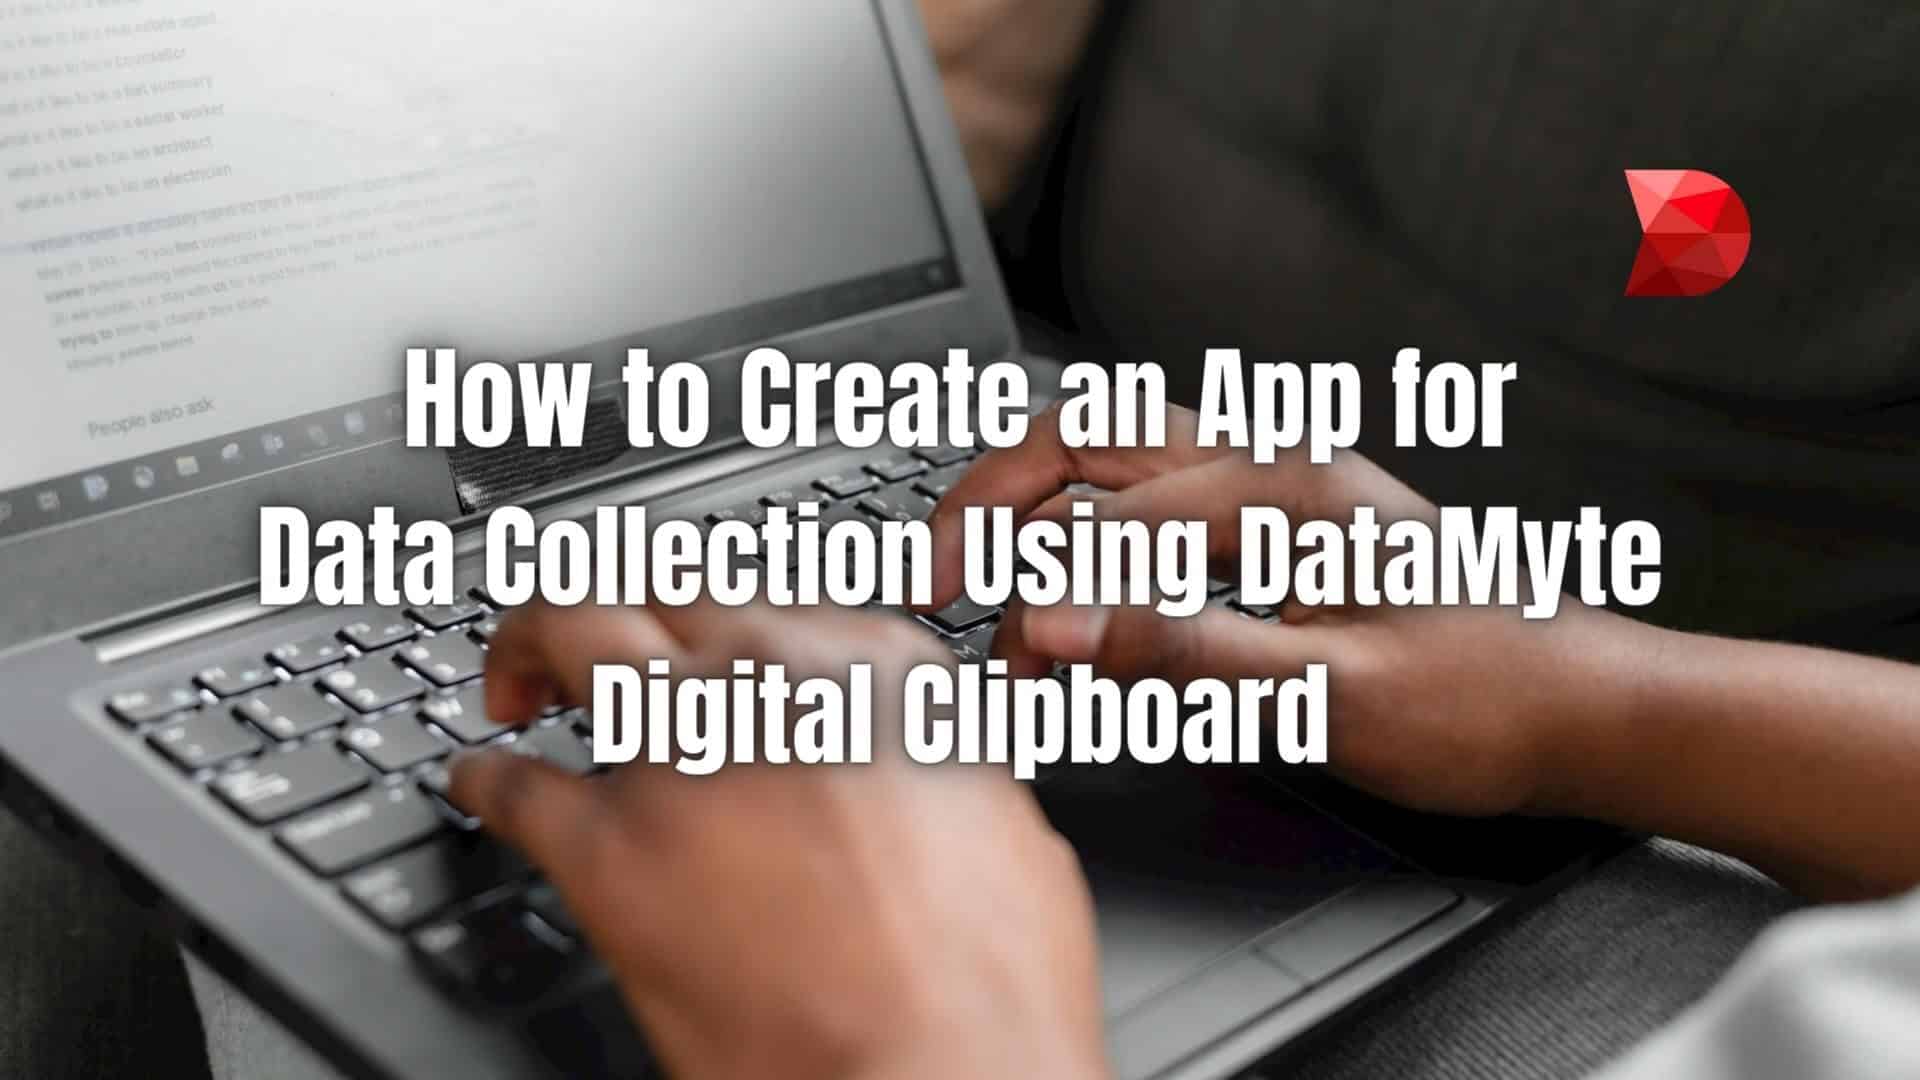 Embark on a journey to enhanced data collection methods. Click here to learn how to create your app for data collection using DataMyte.